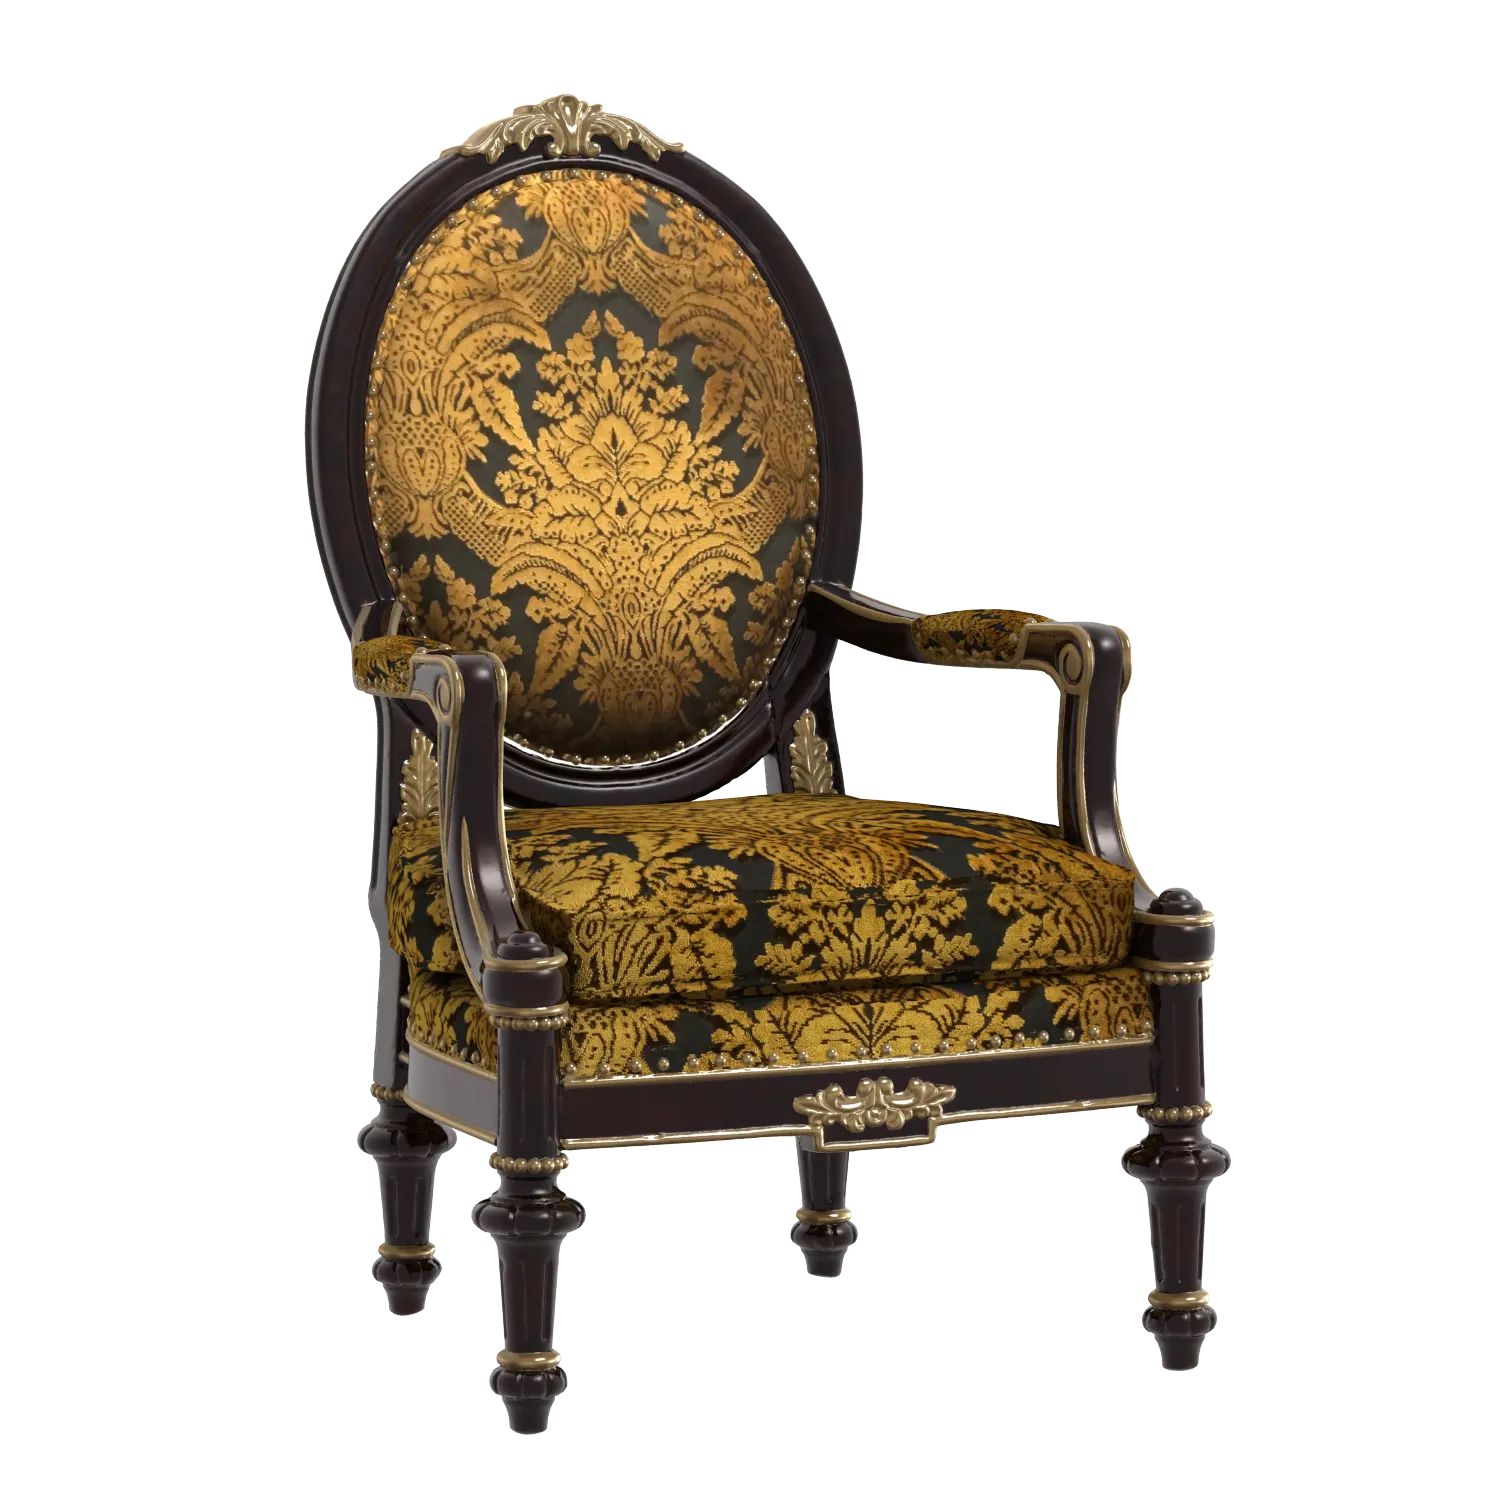 3ds Max Files – Model – 8 – Chair Model – 10 – Chair model by Phong Ngu